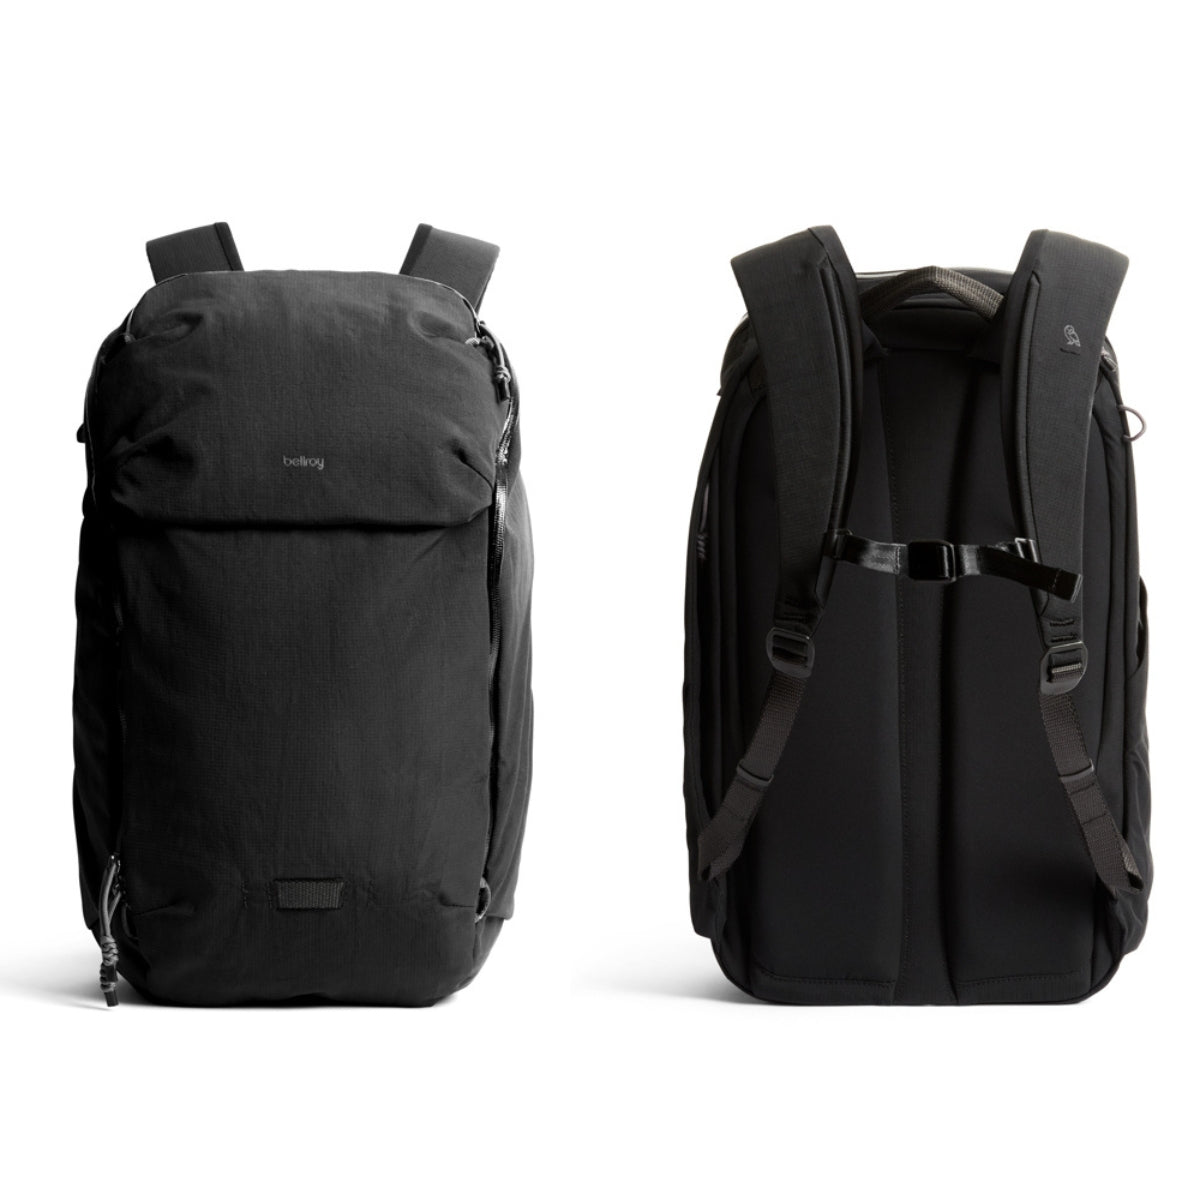 Bellroy Venture Ready Pack 26L in Midnight – Getoutside Shoes